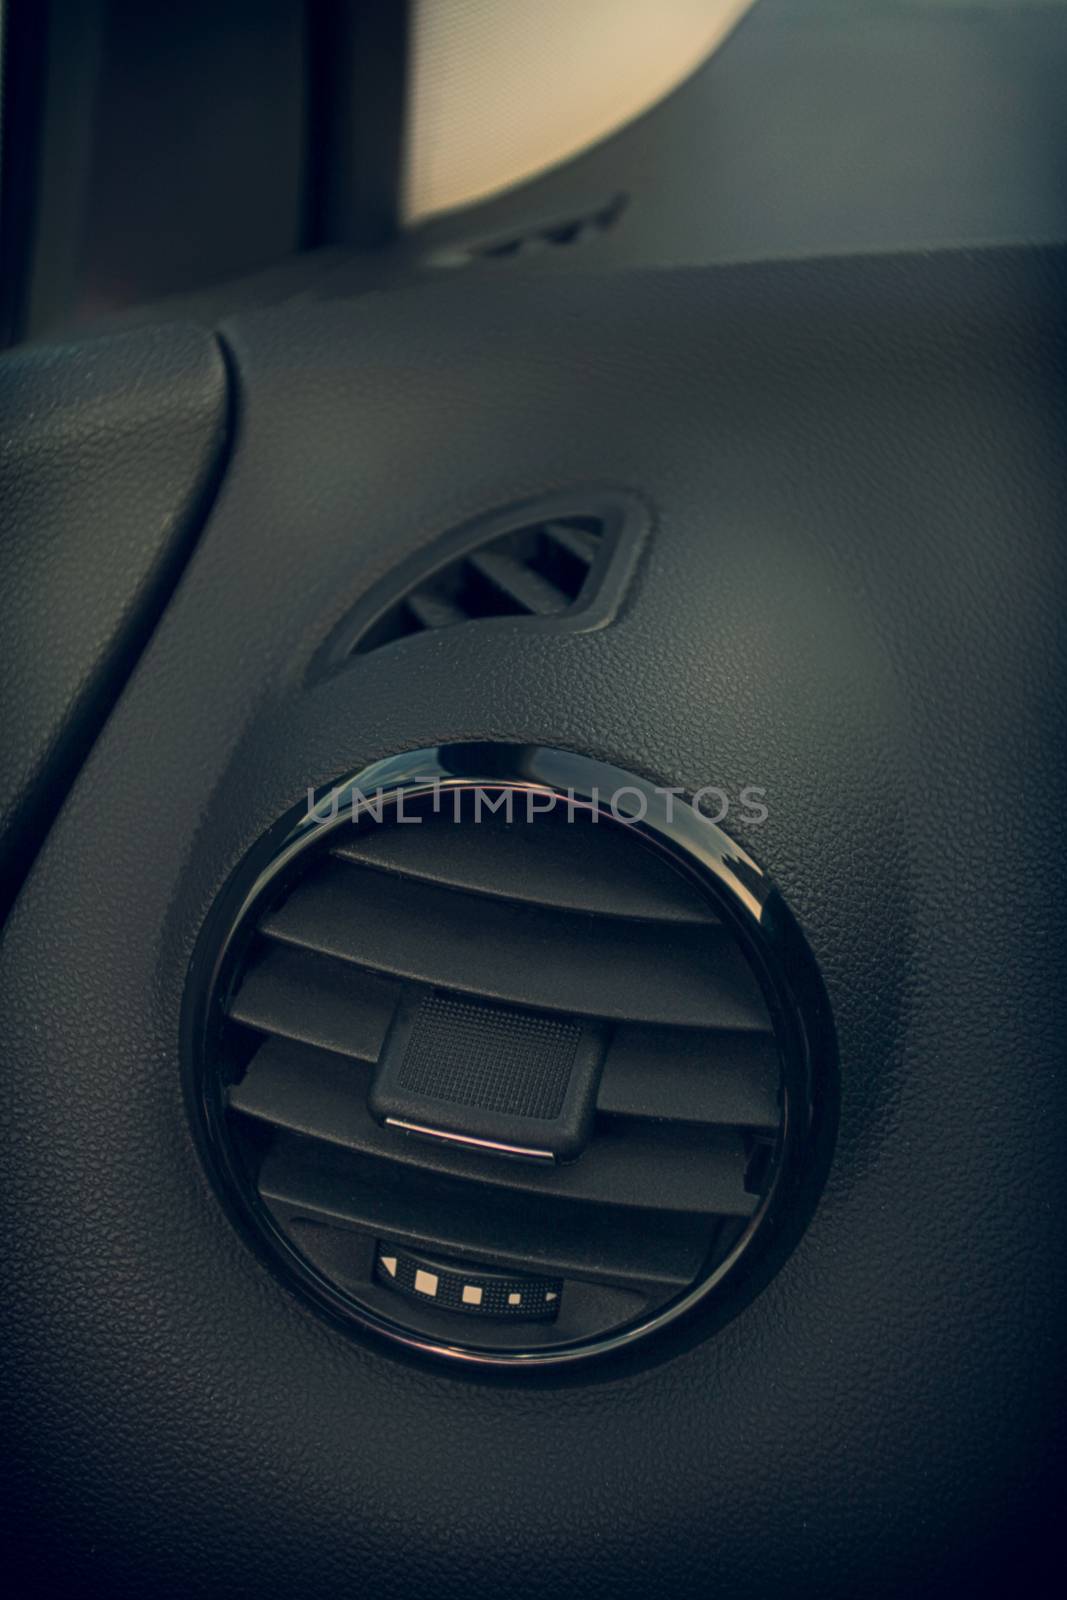 Details of air conditioning (car ventilation system) in modern car